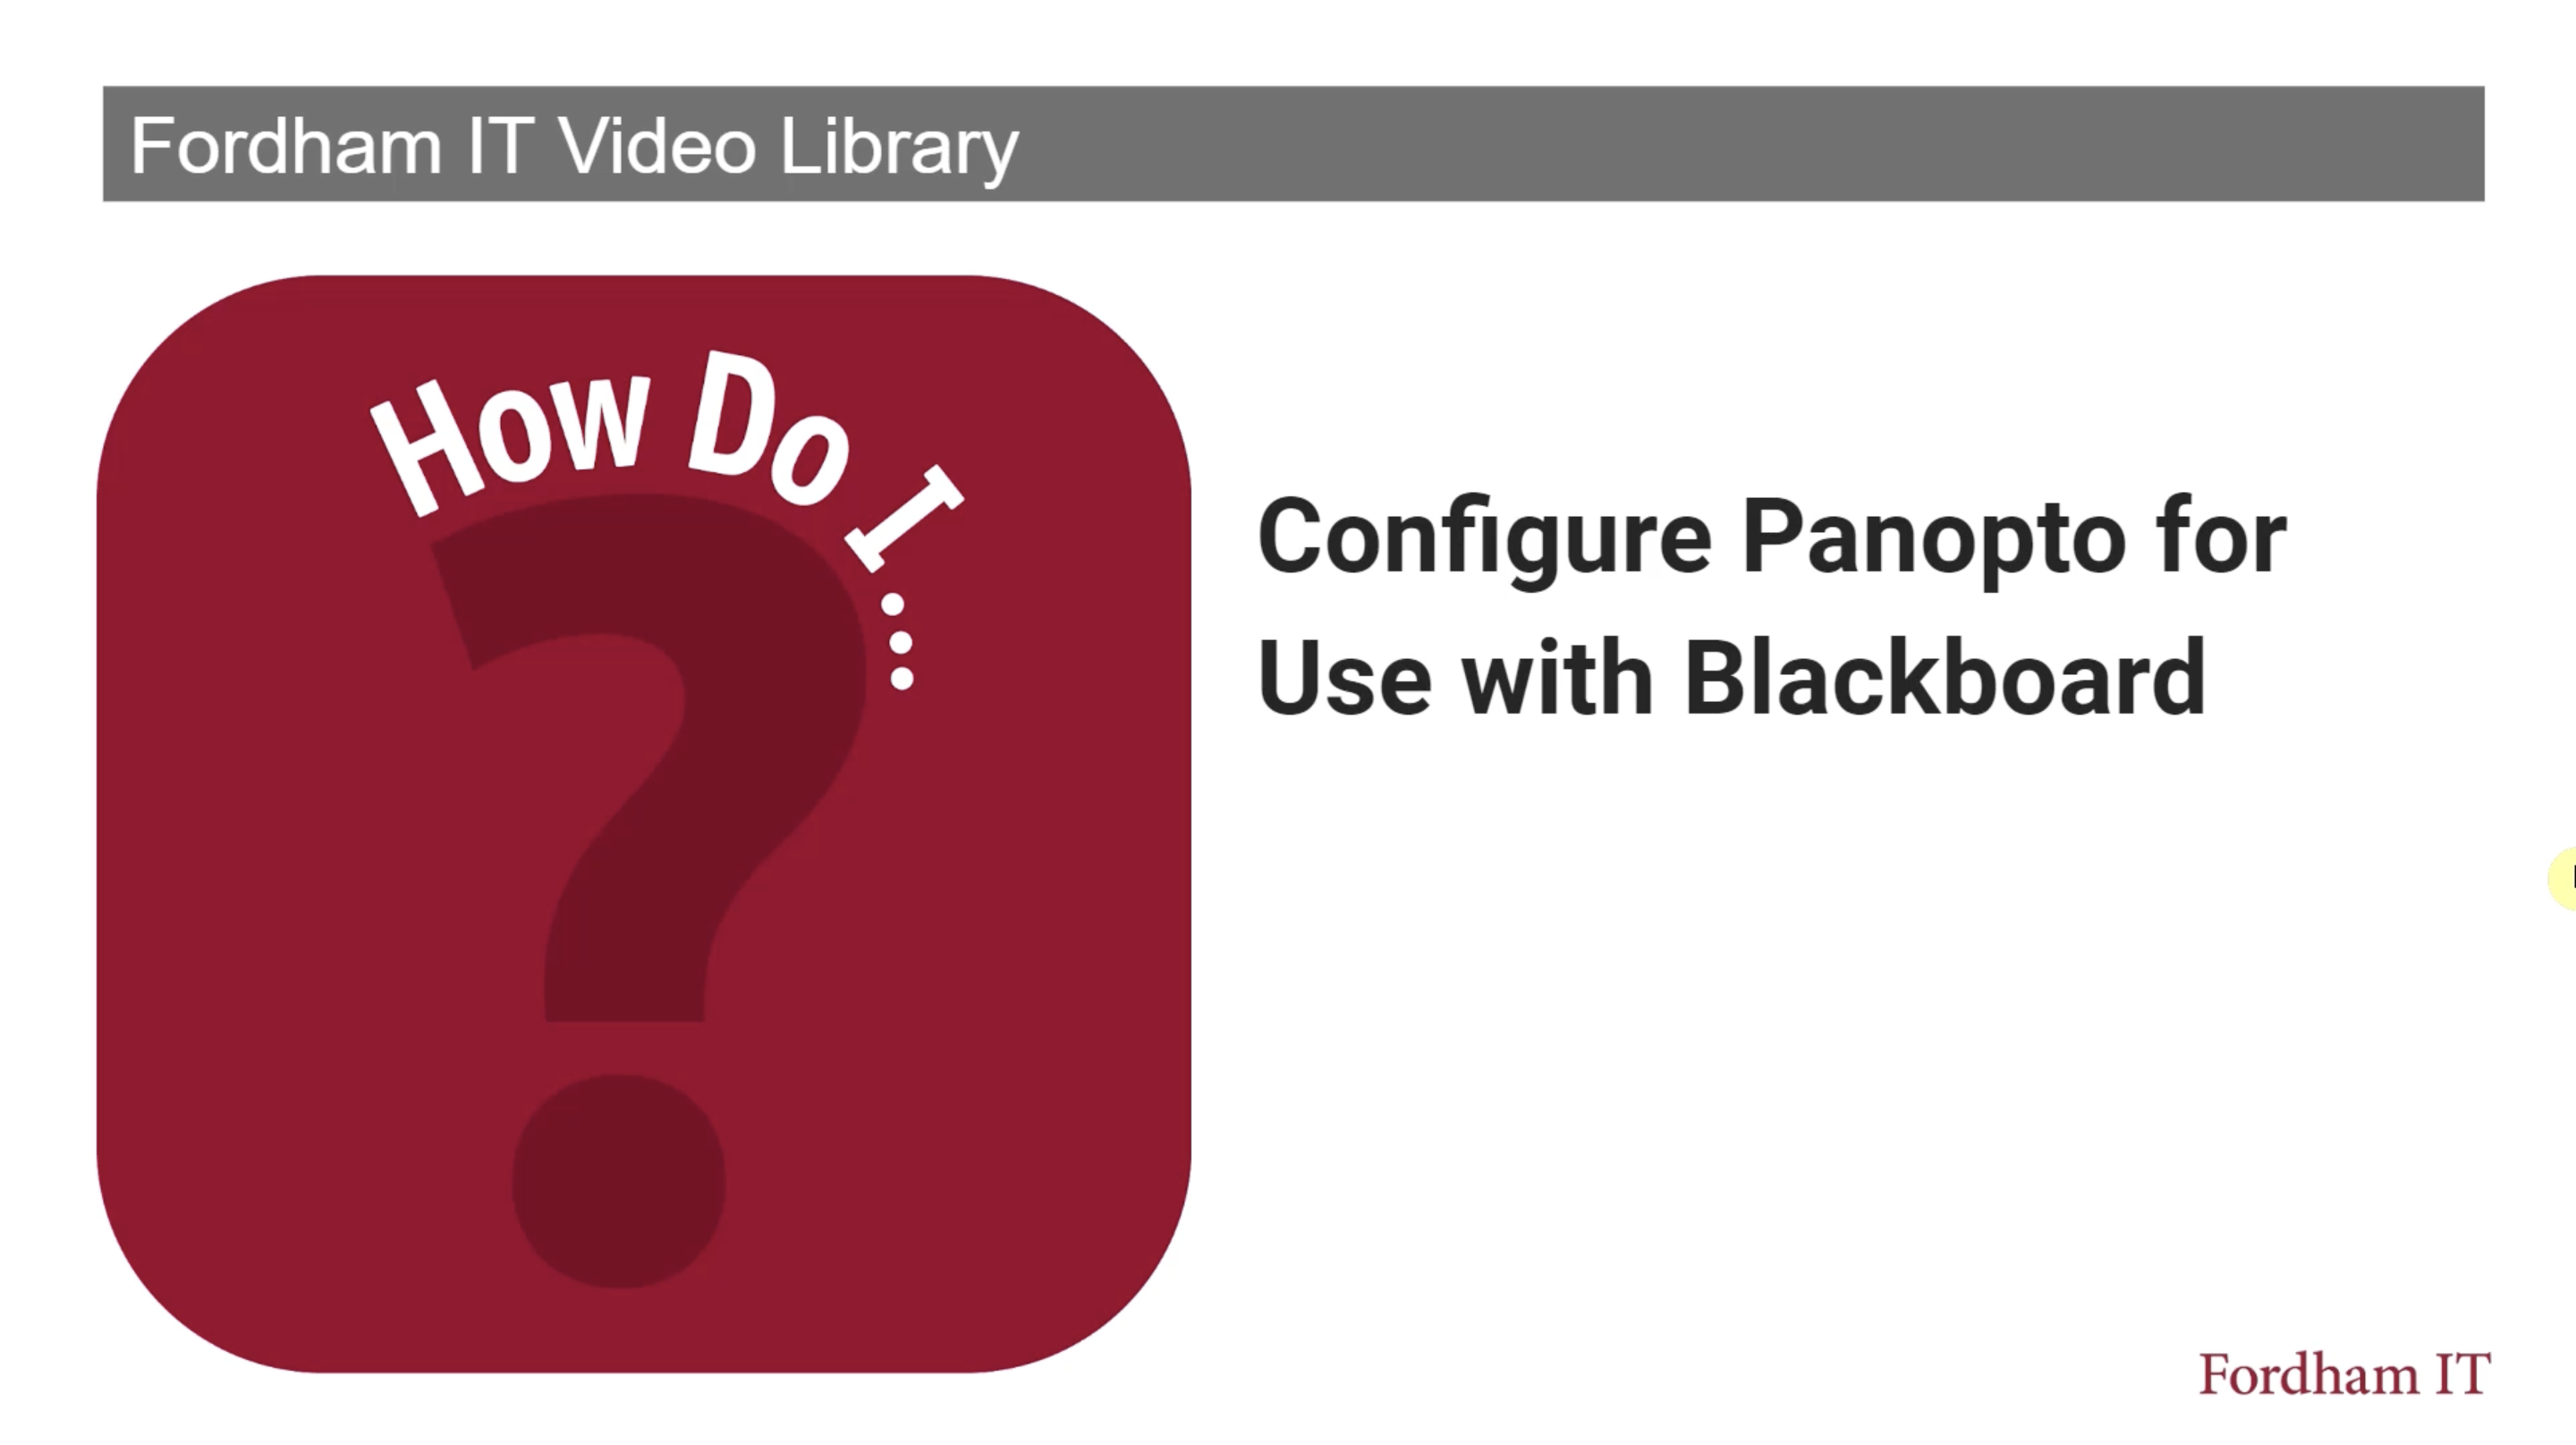 Configure Panopto for Use with Blackboard